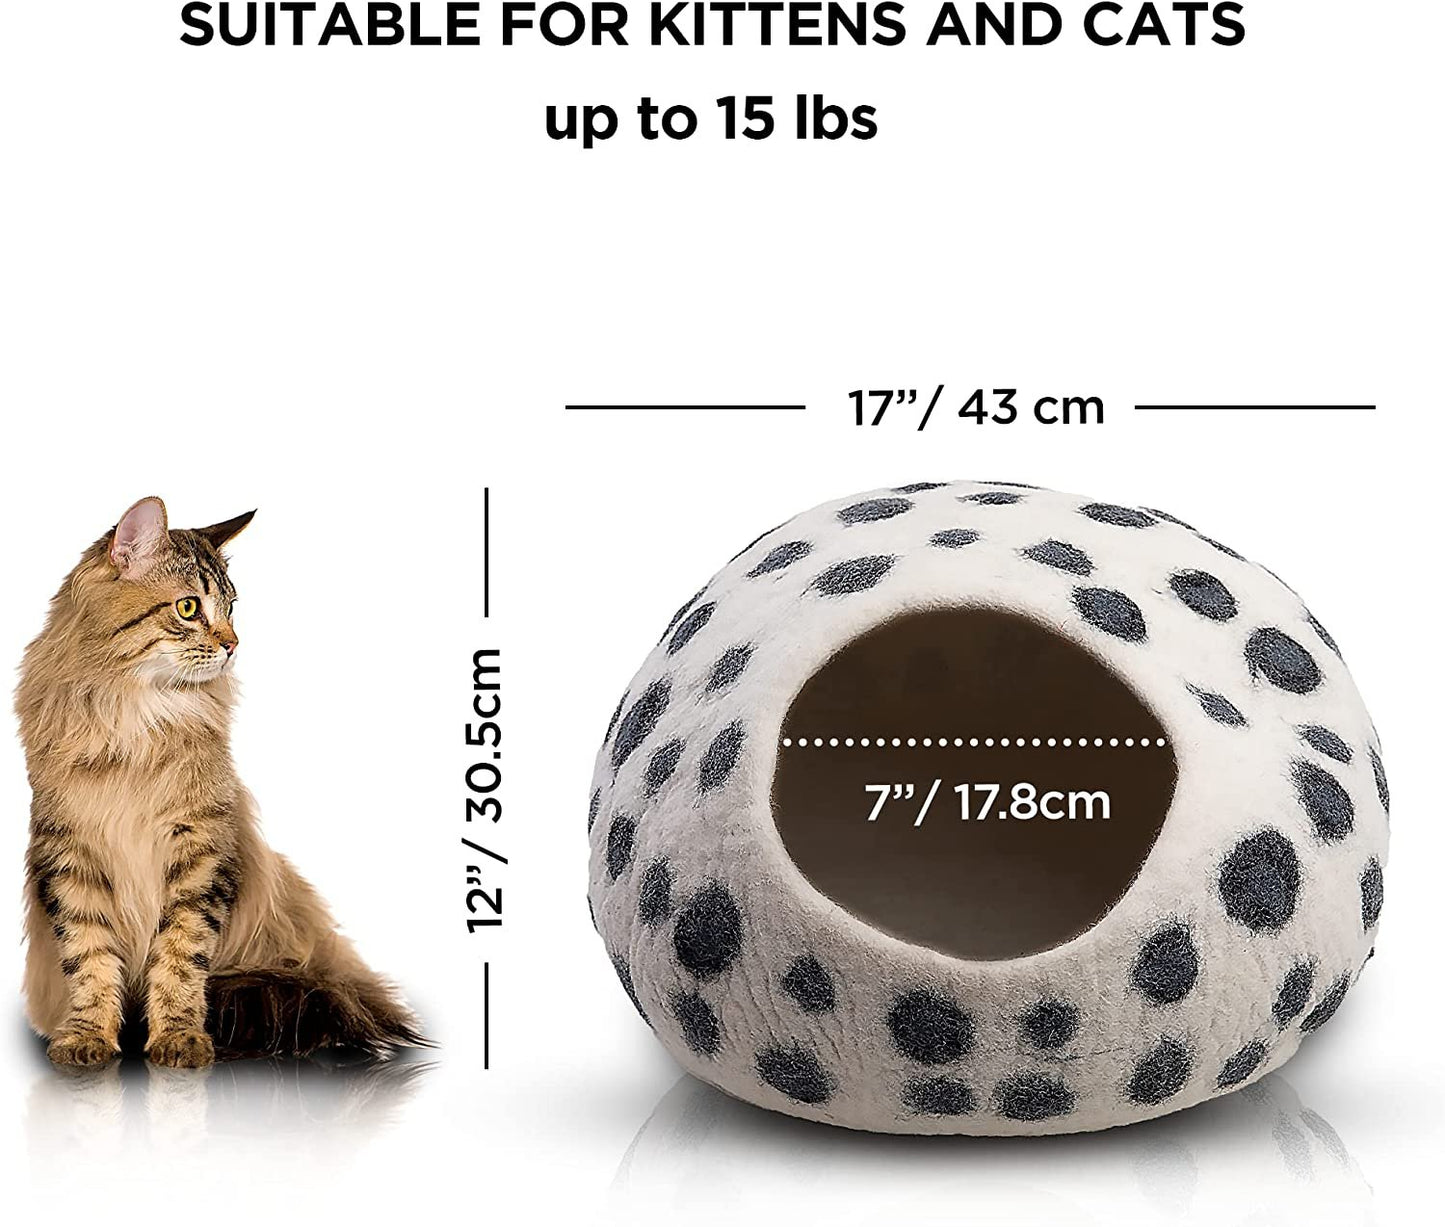 Premium Felt Cat Cave Bed - Wool Kitty Beds Handcrafted Kitten Caves Bed for Indoor Cats - Eco-Friendly Merino Wool, Foldable Cat Hideaway Cat Houses Pod by Woolygon